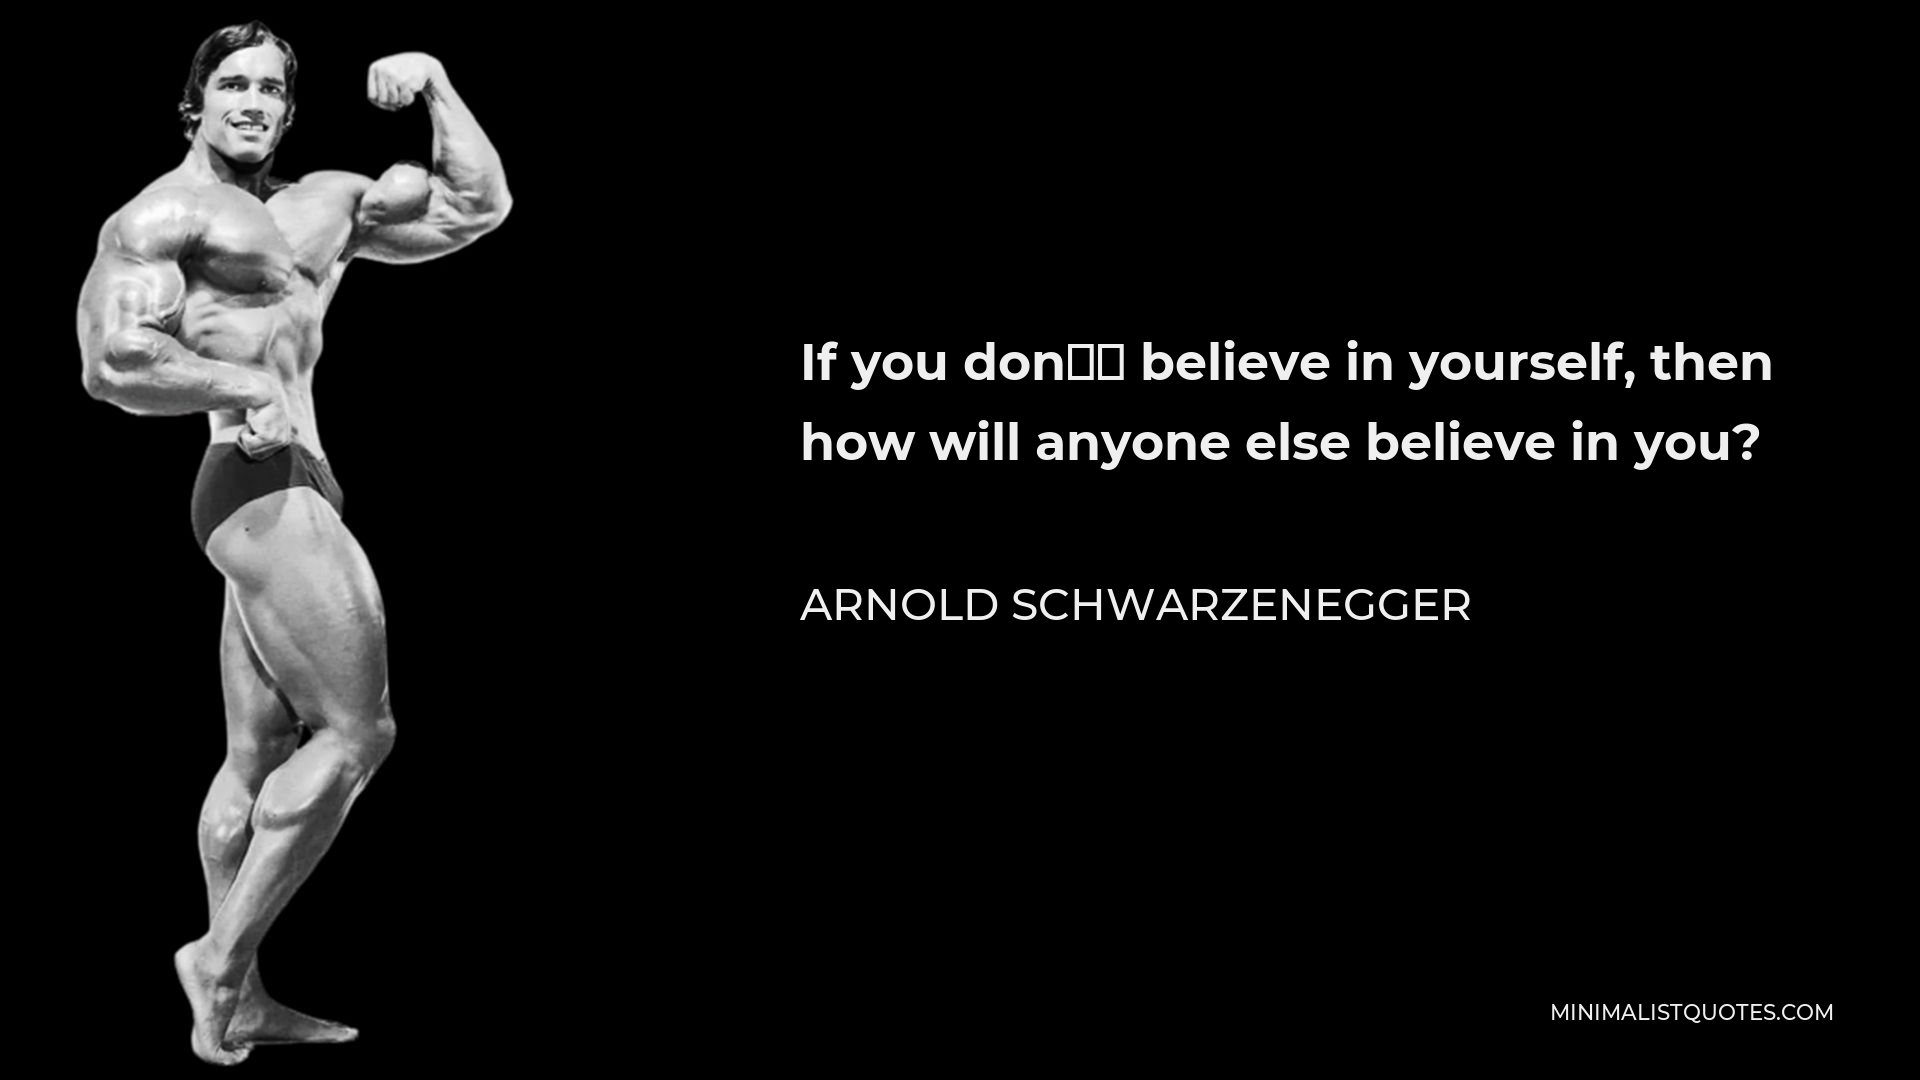 Arnold Schwarzenegger Quote - If you don’t believe in yourself, then how will anyone else believe in you?